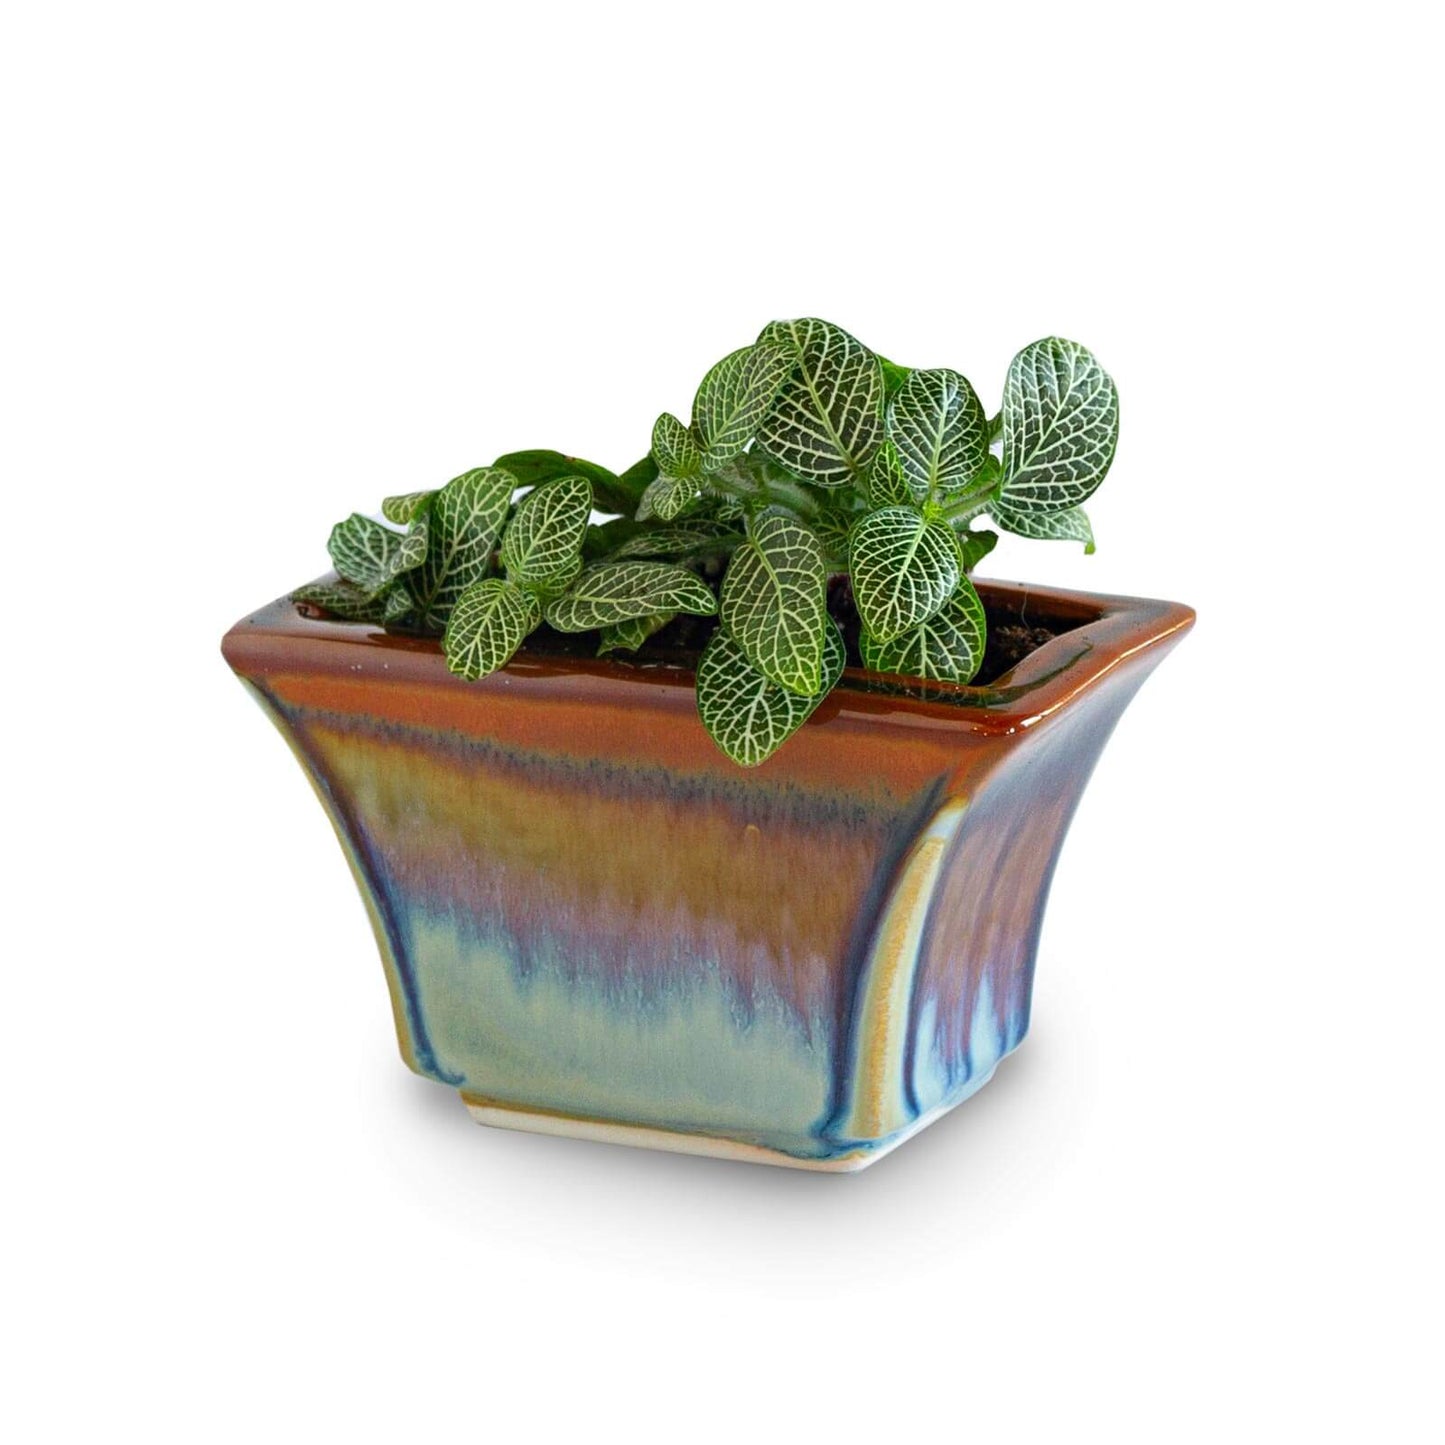 Handmade Pottery Windowsill Planter in Purple Hamada pattern made by Georgetown Pottery in Maine